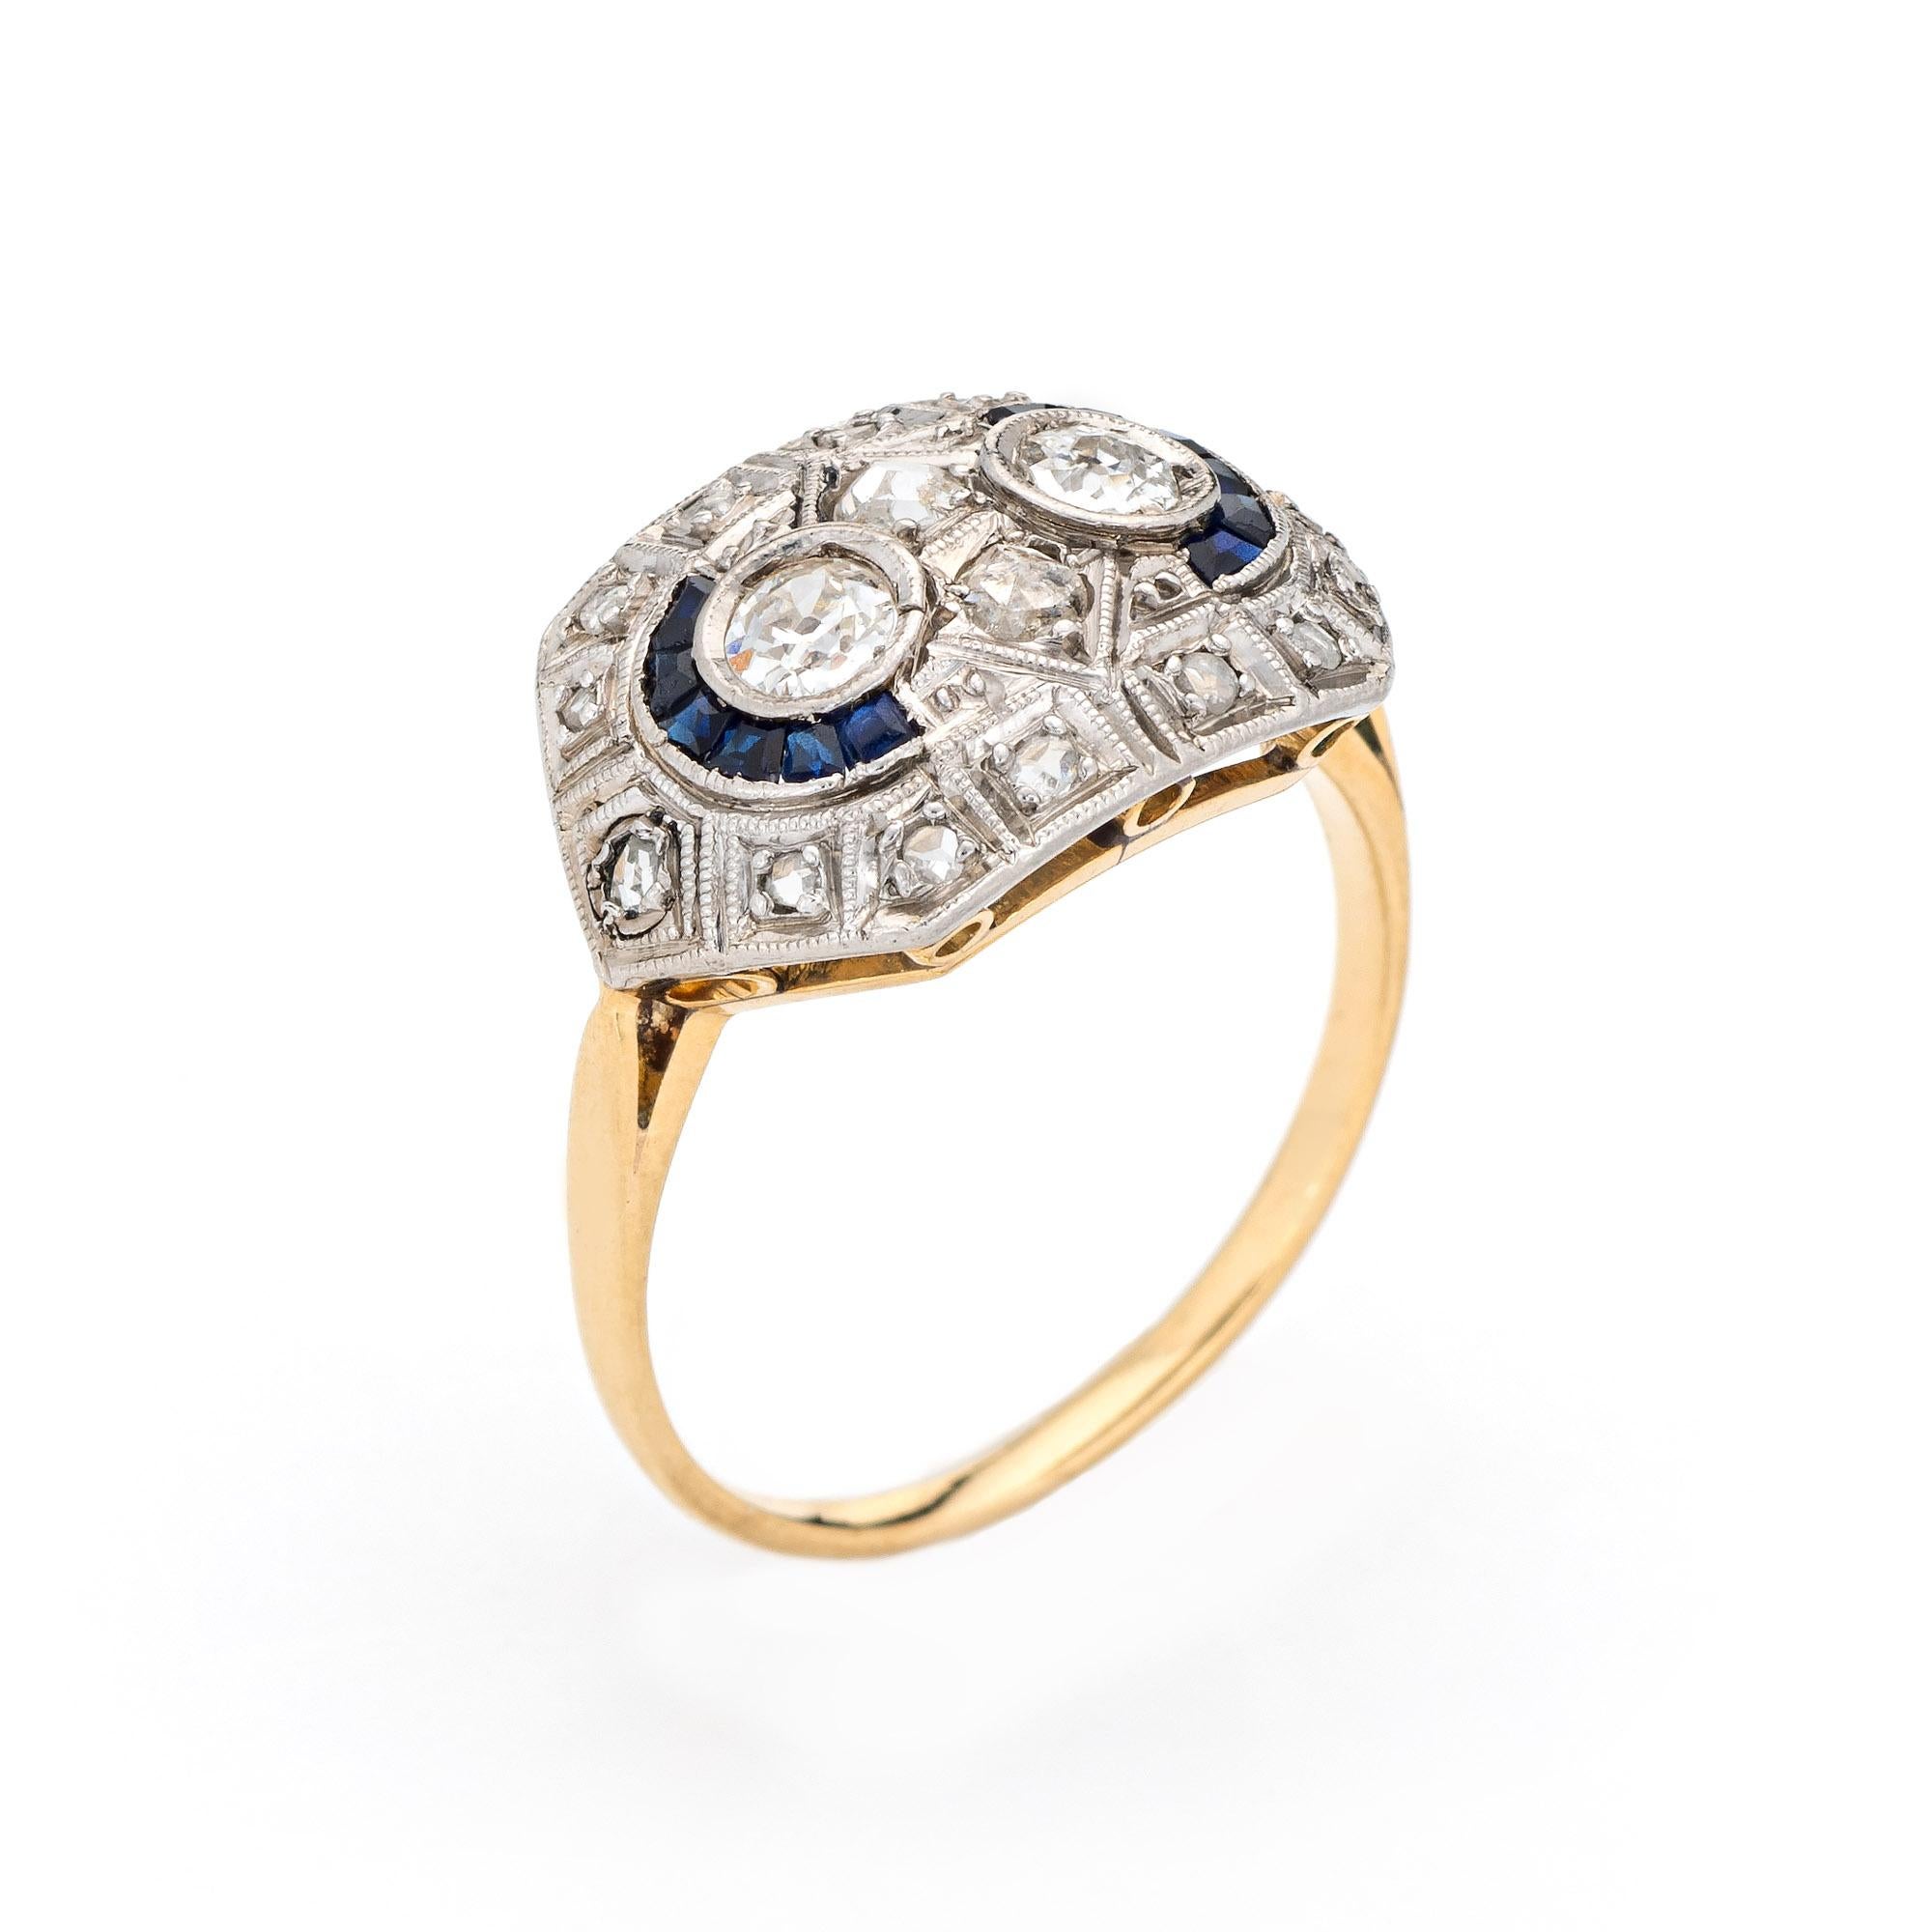 Finely detailed vintage Art Deco diamond & sapphire ring (circa 1920s to 1930s) crafted in 18k yellow gold & platinum. 

Two center set estimated 0.15 carat old mine cut diamonds total an estimated 0.30 carats (estimated at J-K color and SI1-I1